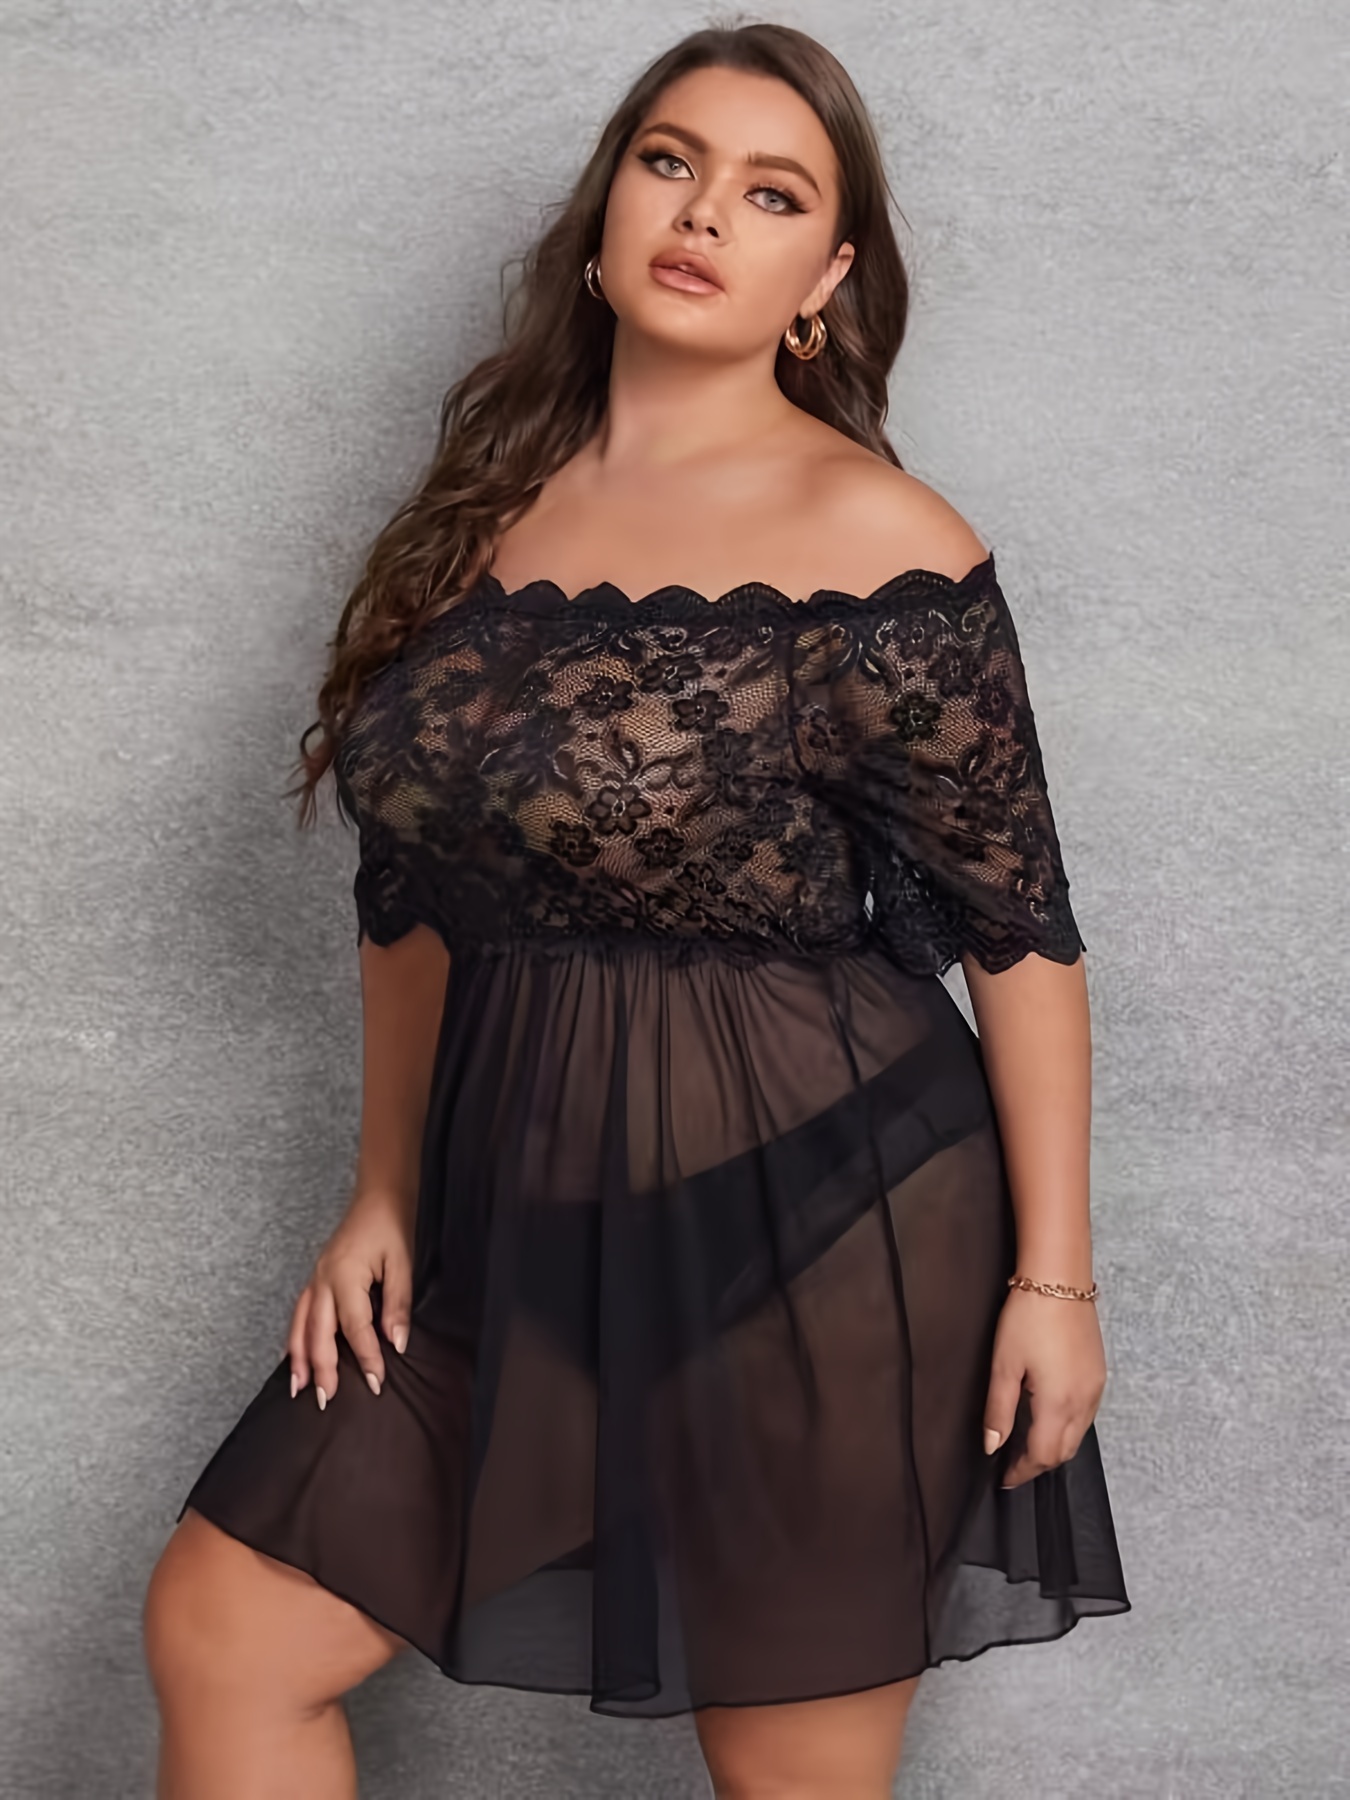 Plus Size Contrast Lace Semi Sheer Sexy Lingerie, Women's Plus Jacquard  High Stretch Sexy Lingerie